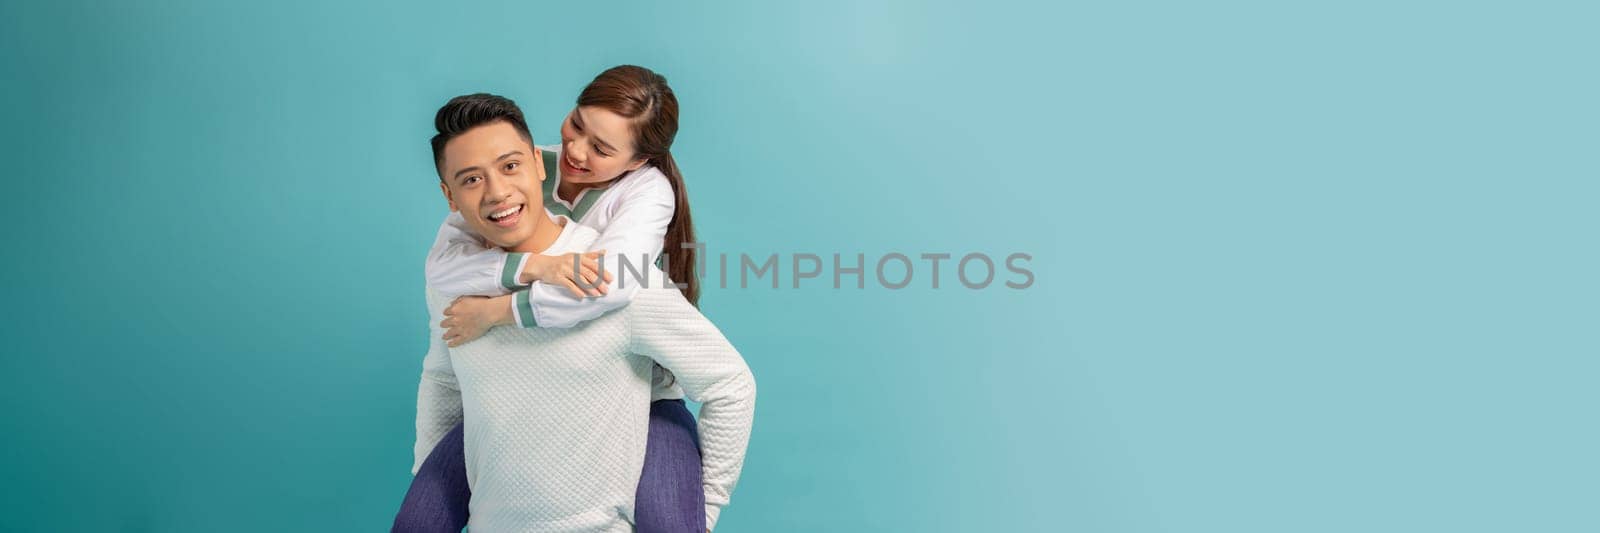 Happy smiling couple in love. Over blue background